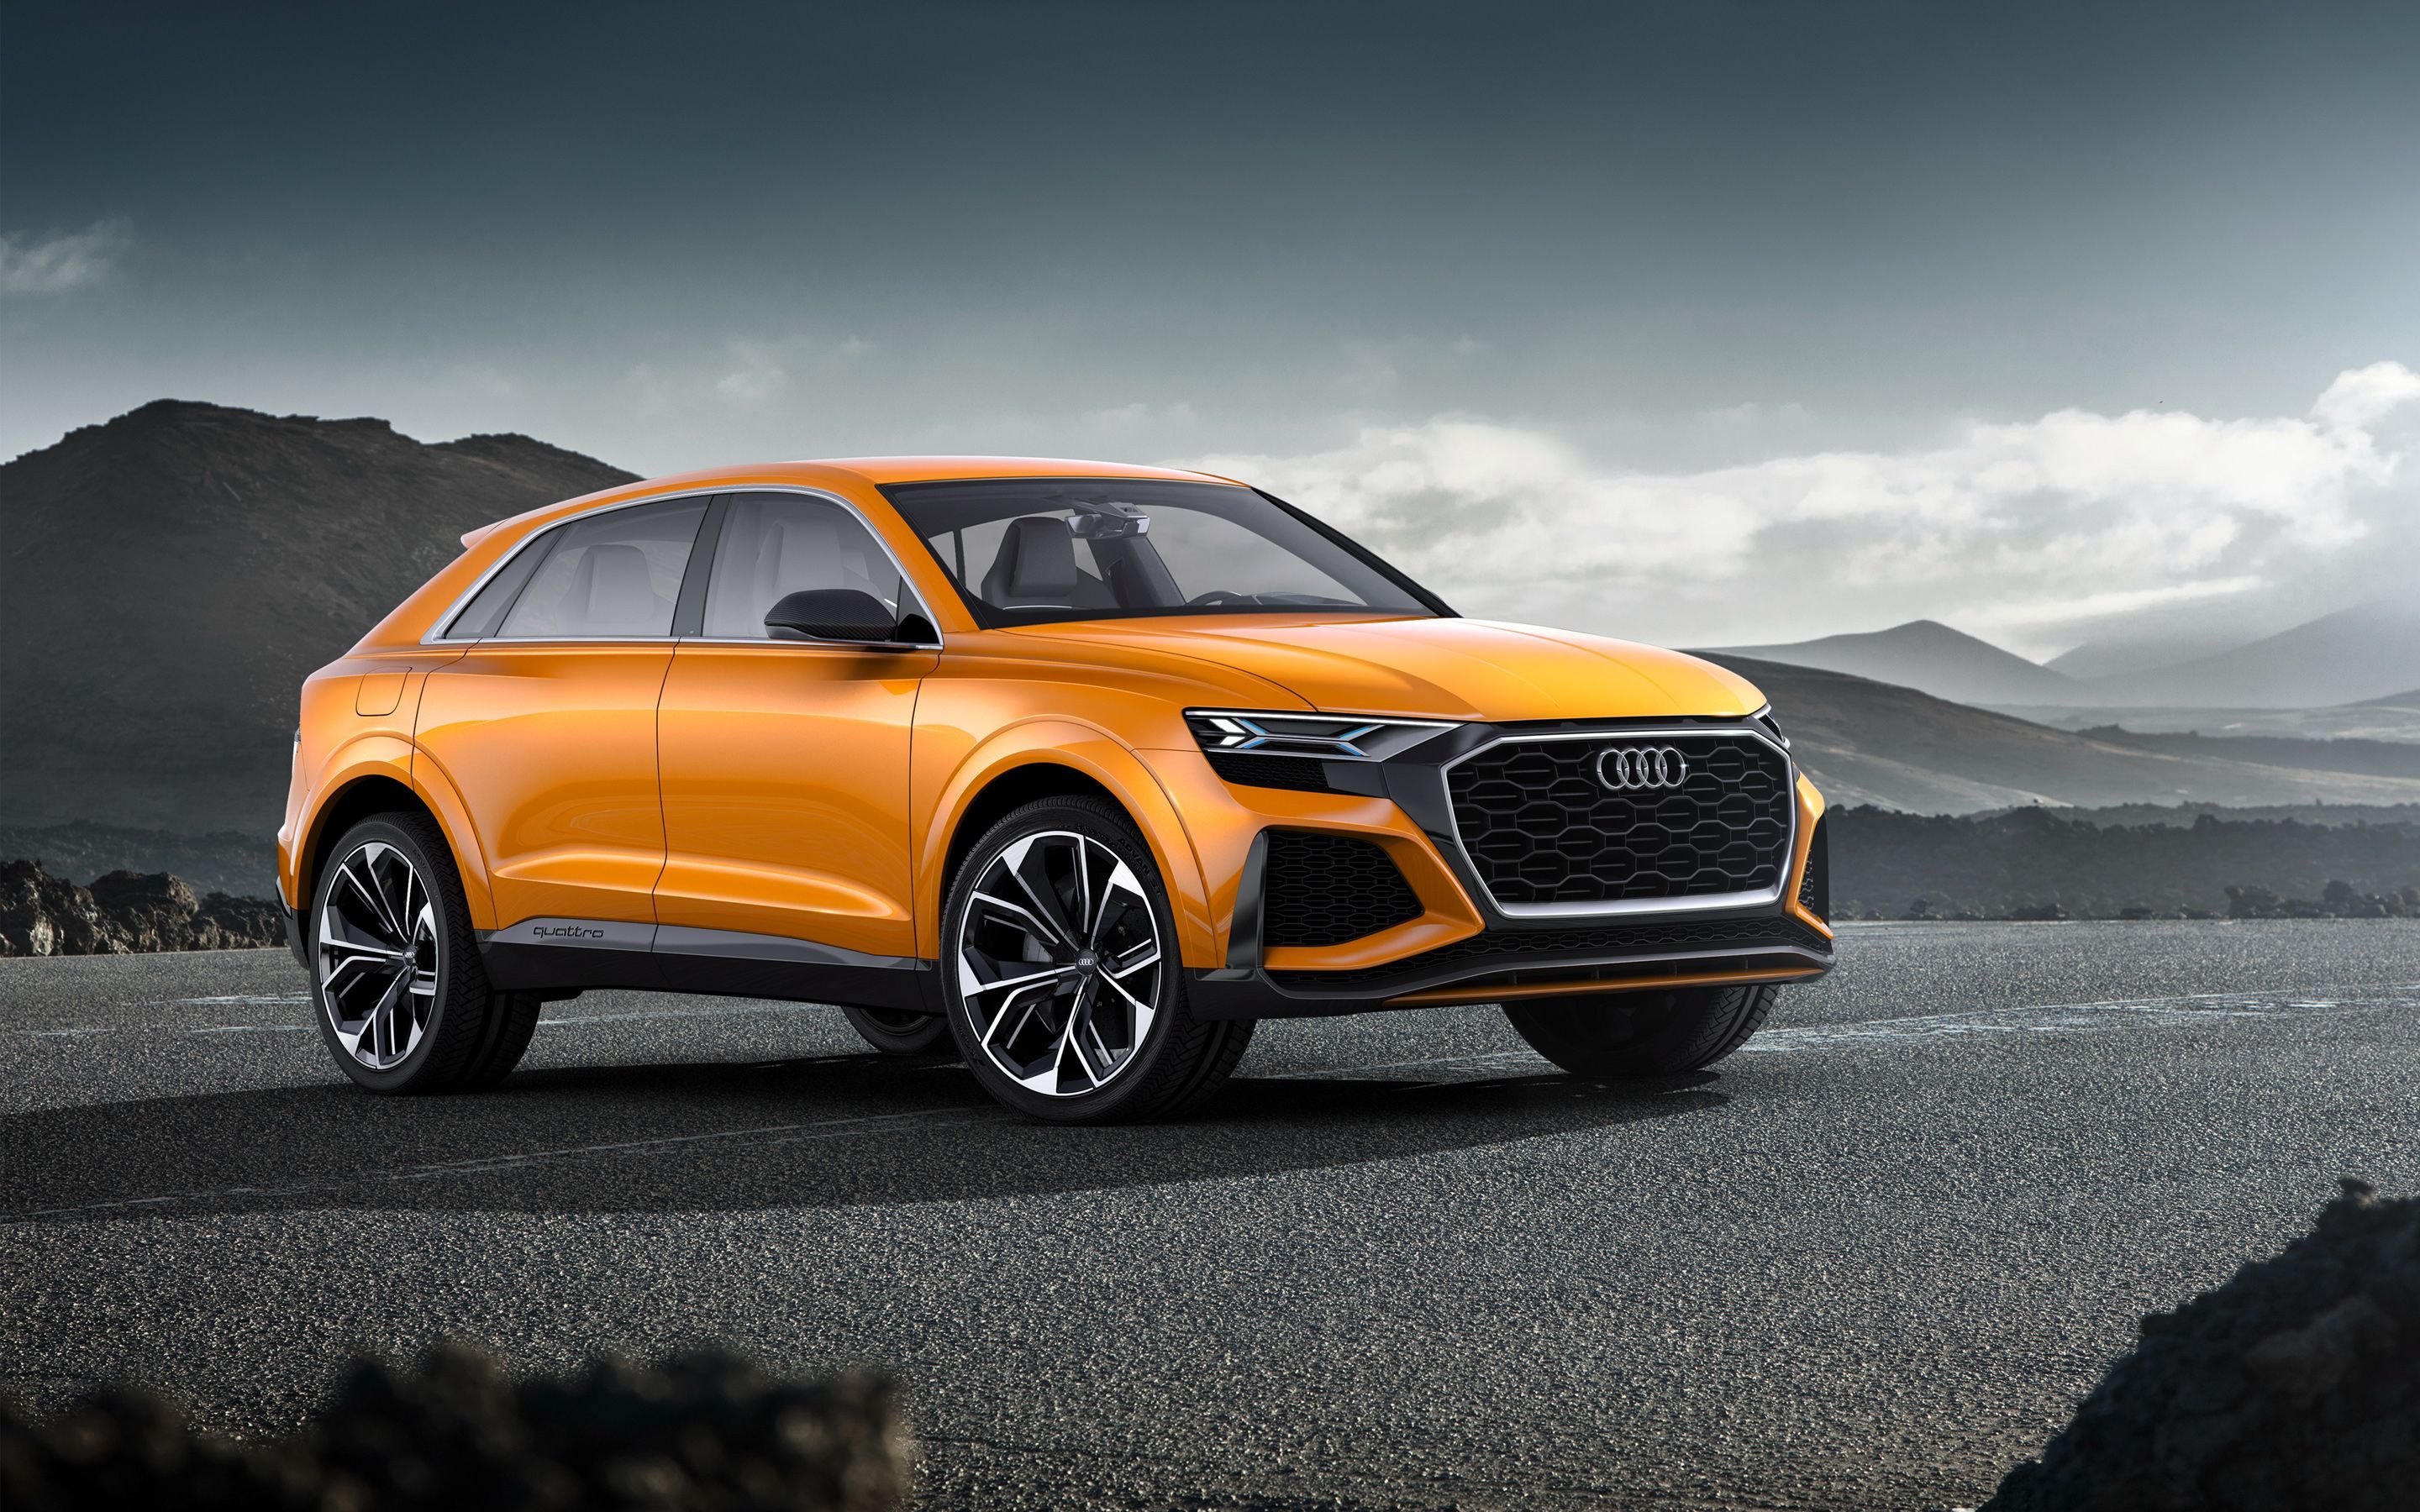 How Much It Cost To Rent Audi Q8 In Dubai 